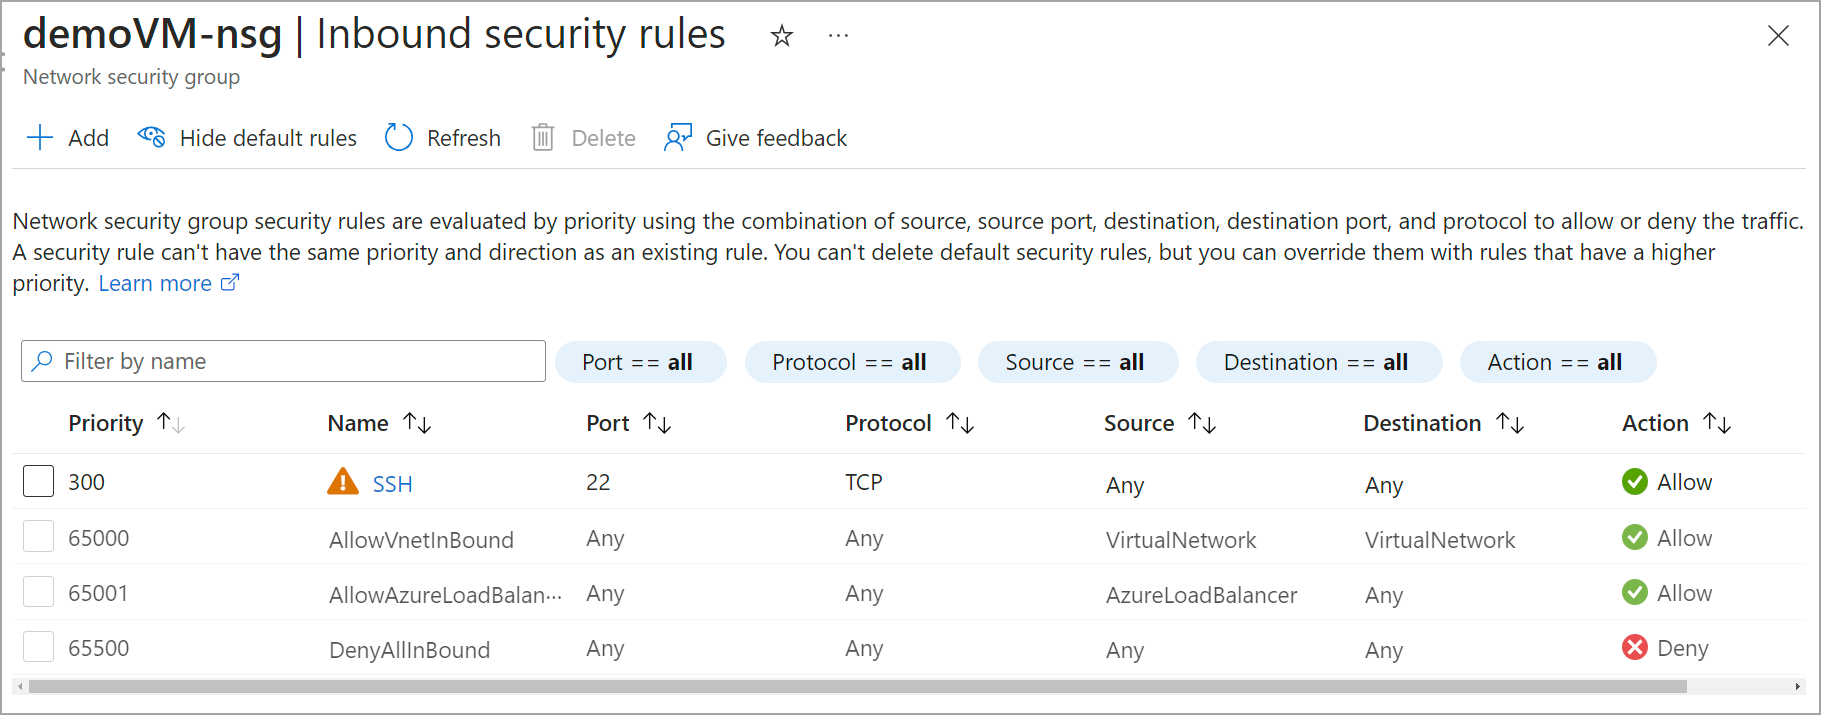 Inbound security rules for a VM